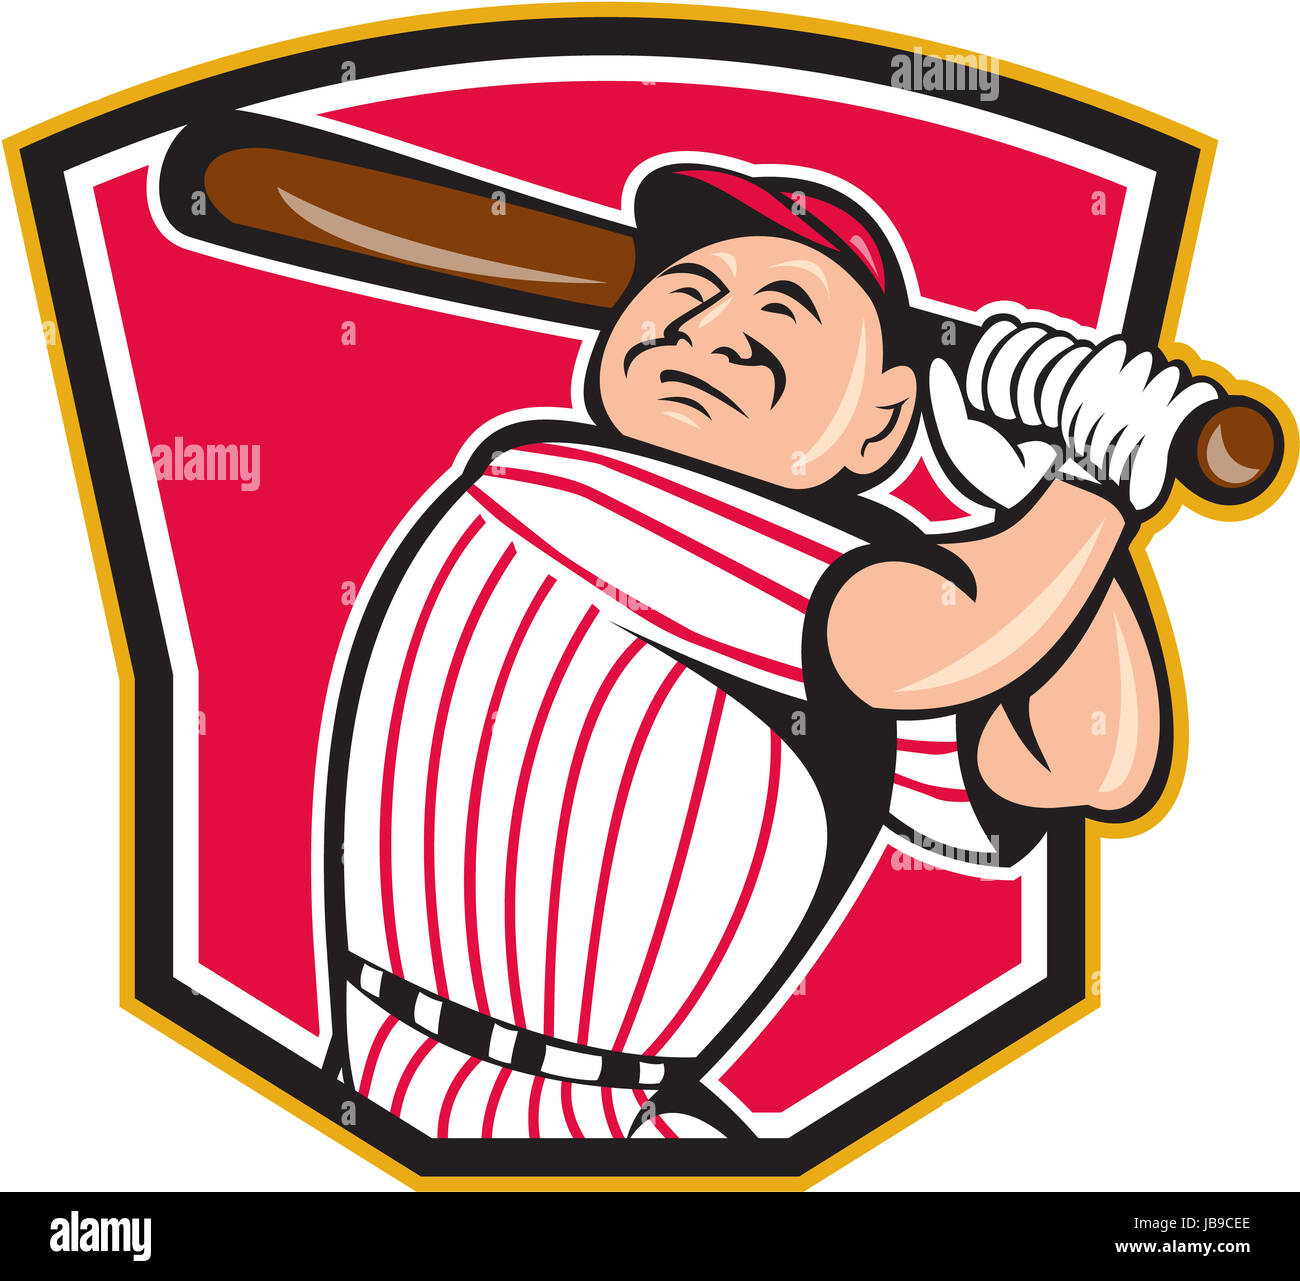 Illustration of a american baseball player batter hitter batting with bat inside crest shield shape done in cartoon style isolated on white background. Stock Photo